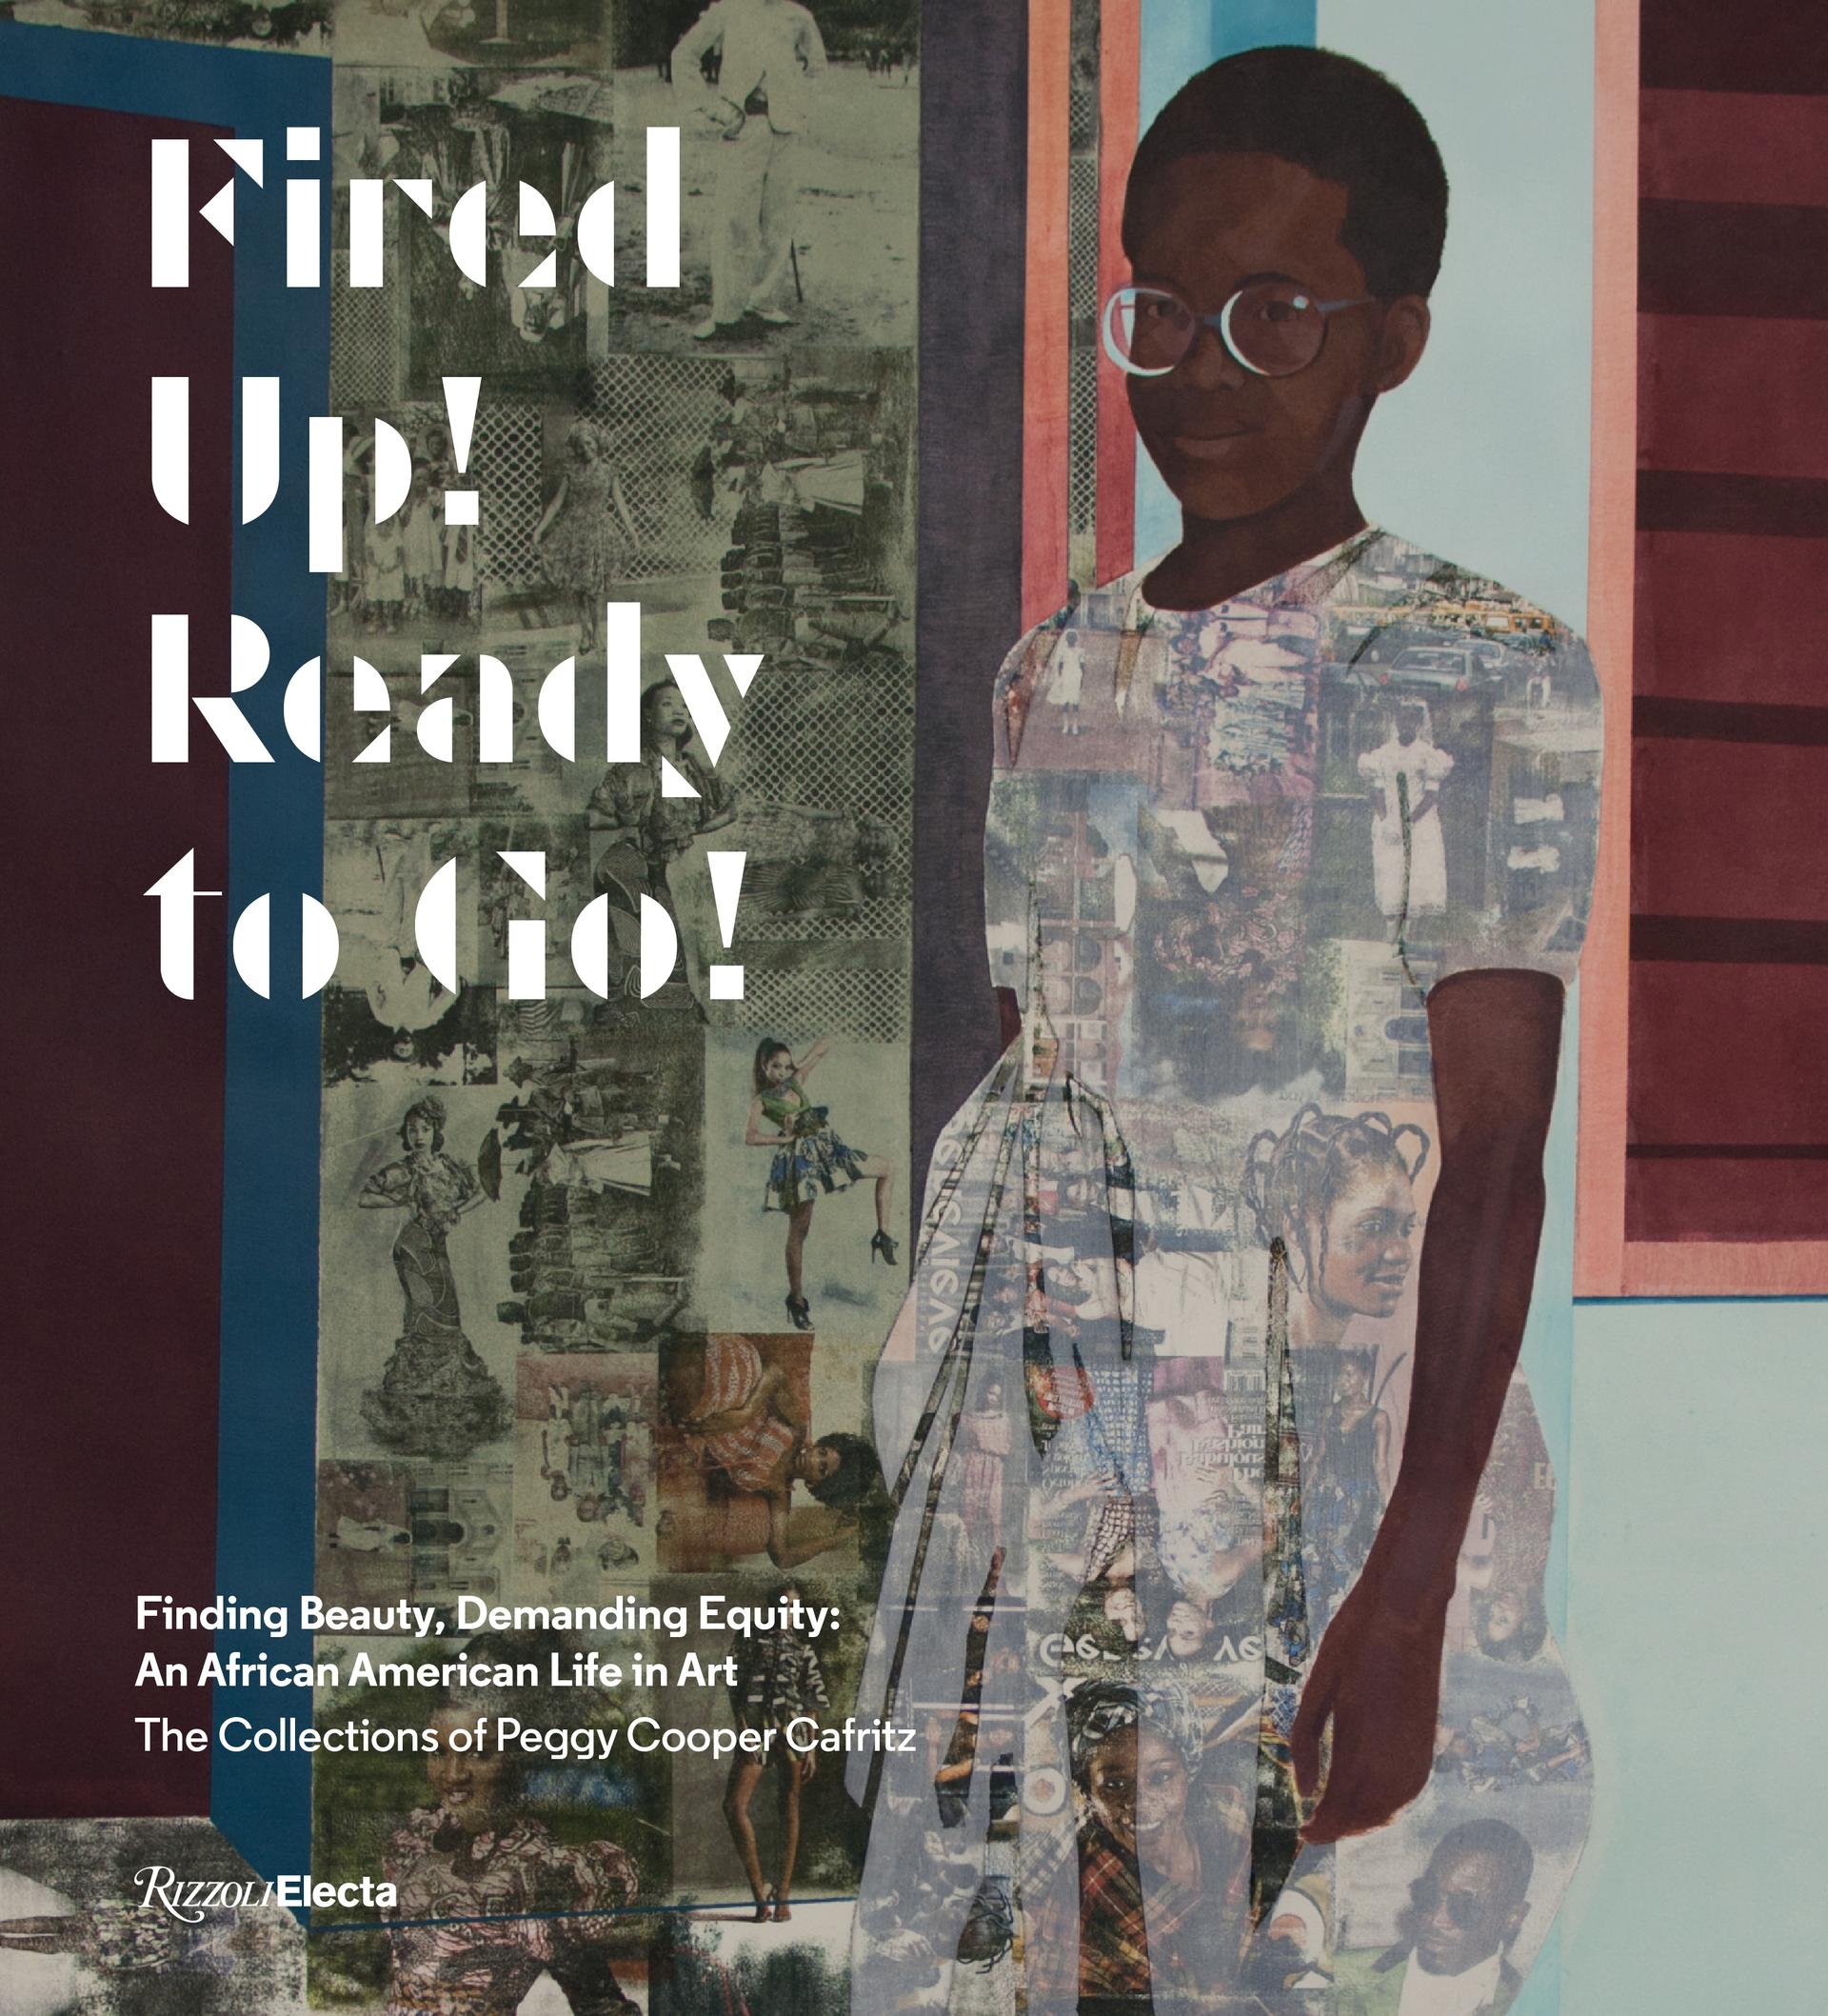 “Fired Up! Ready to Go! Finding Beauty, Demanding Equity: An African American Life in Art” by Peggy Cooper Cafritz